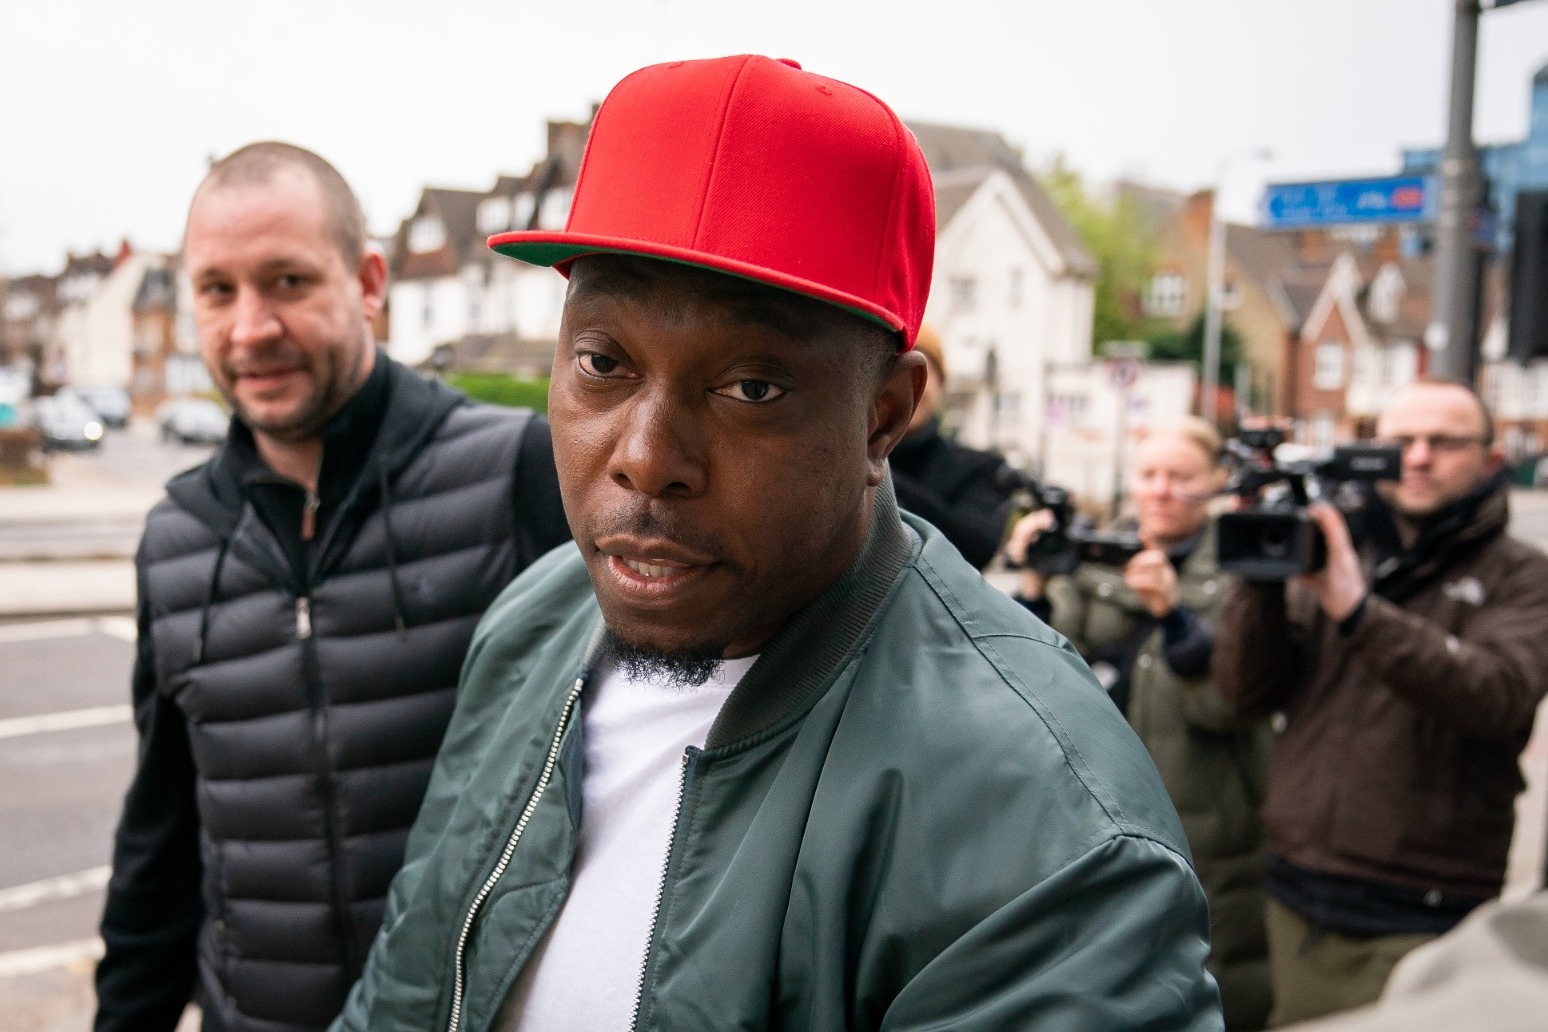 Dizzee Rascal handed restraining order and curfew for attacking ex fiancee